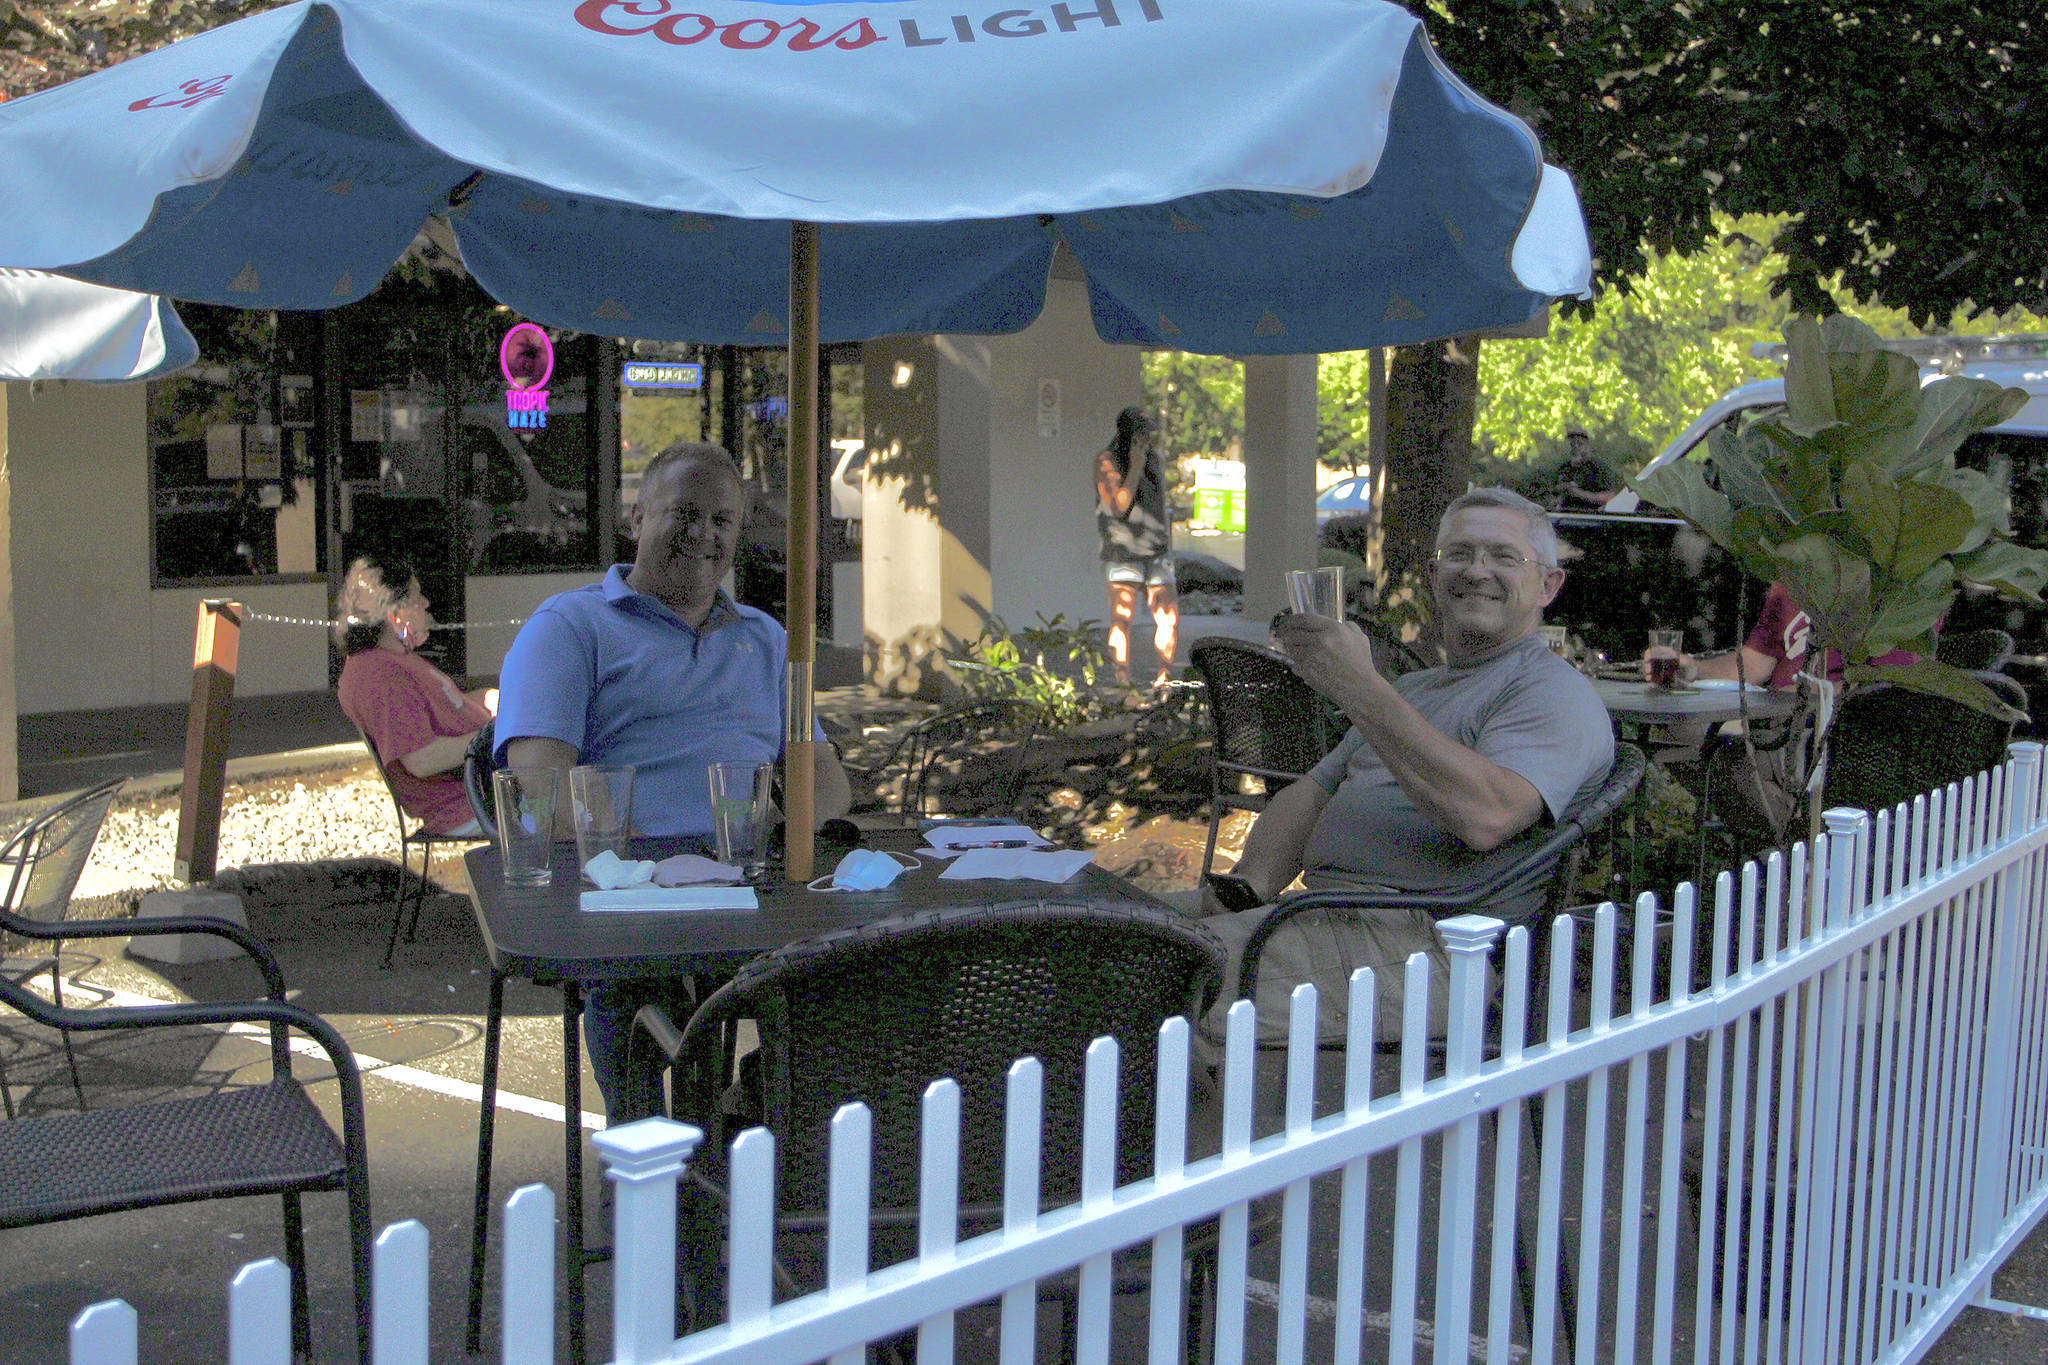 Federal Way residents Kevin Jochim, left, and Steve Reichel enjoy drinks on the new patio area at JP’s Tavern on Aug. 5. File photo